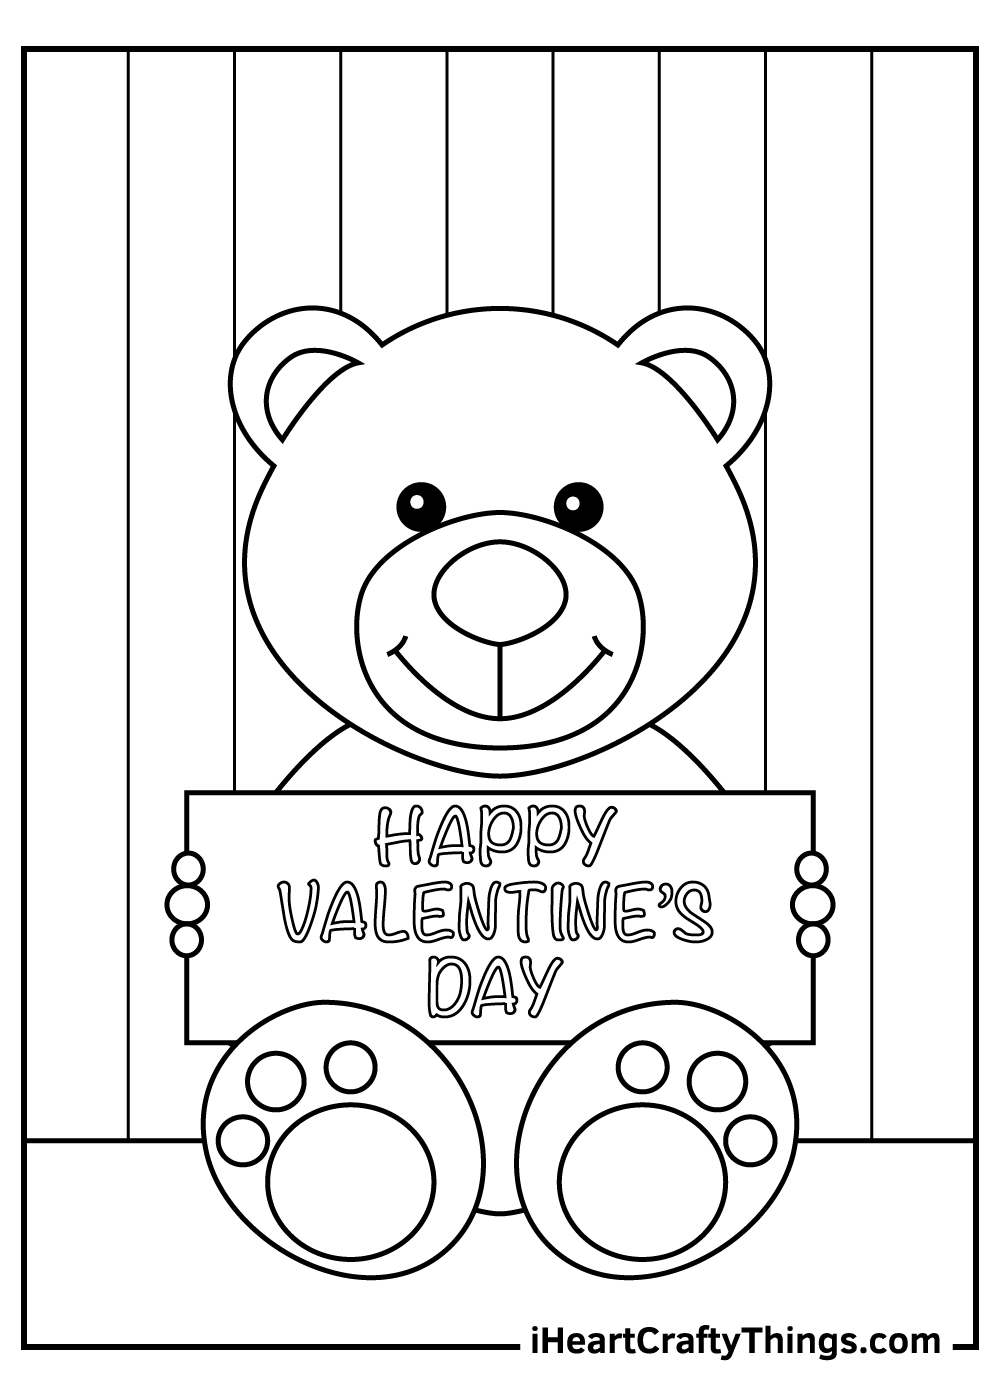 St valentines day coloring pages free printables